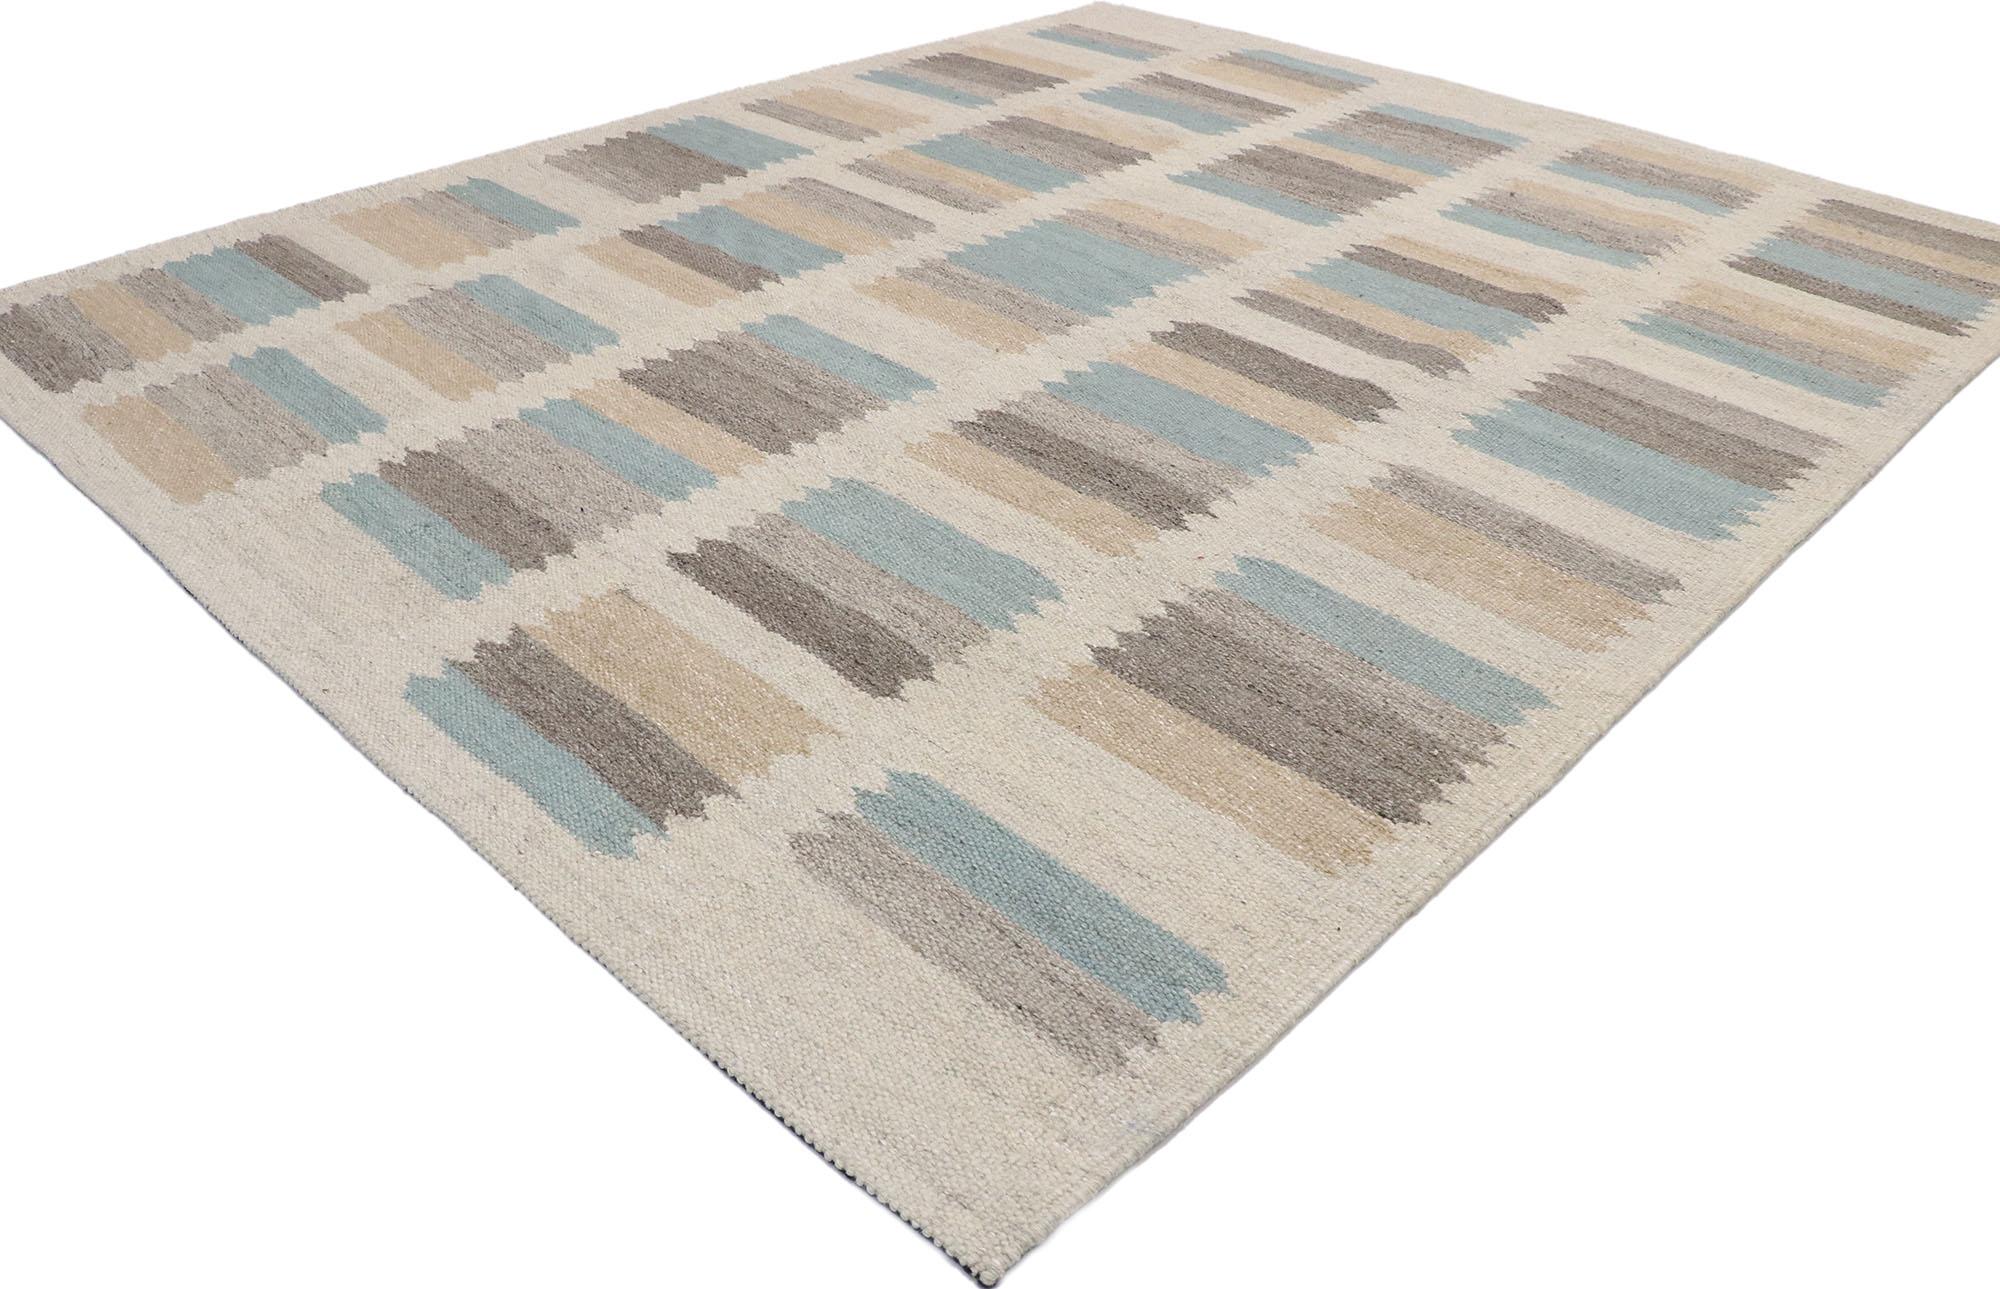 30616, new Contemporary Swedish Inspired Kilim rug with Scandinavian Modern style. With its geometric design and Bohemian hygge vibes, this handwoven wool Swedish Indian Kilim rug beautifully embodies the simplicity of Scandinavian Modern style. It